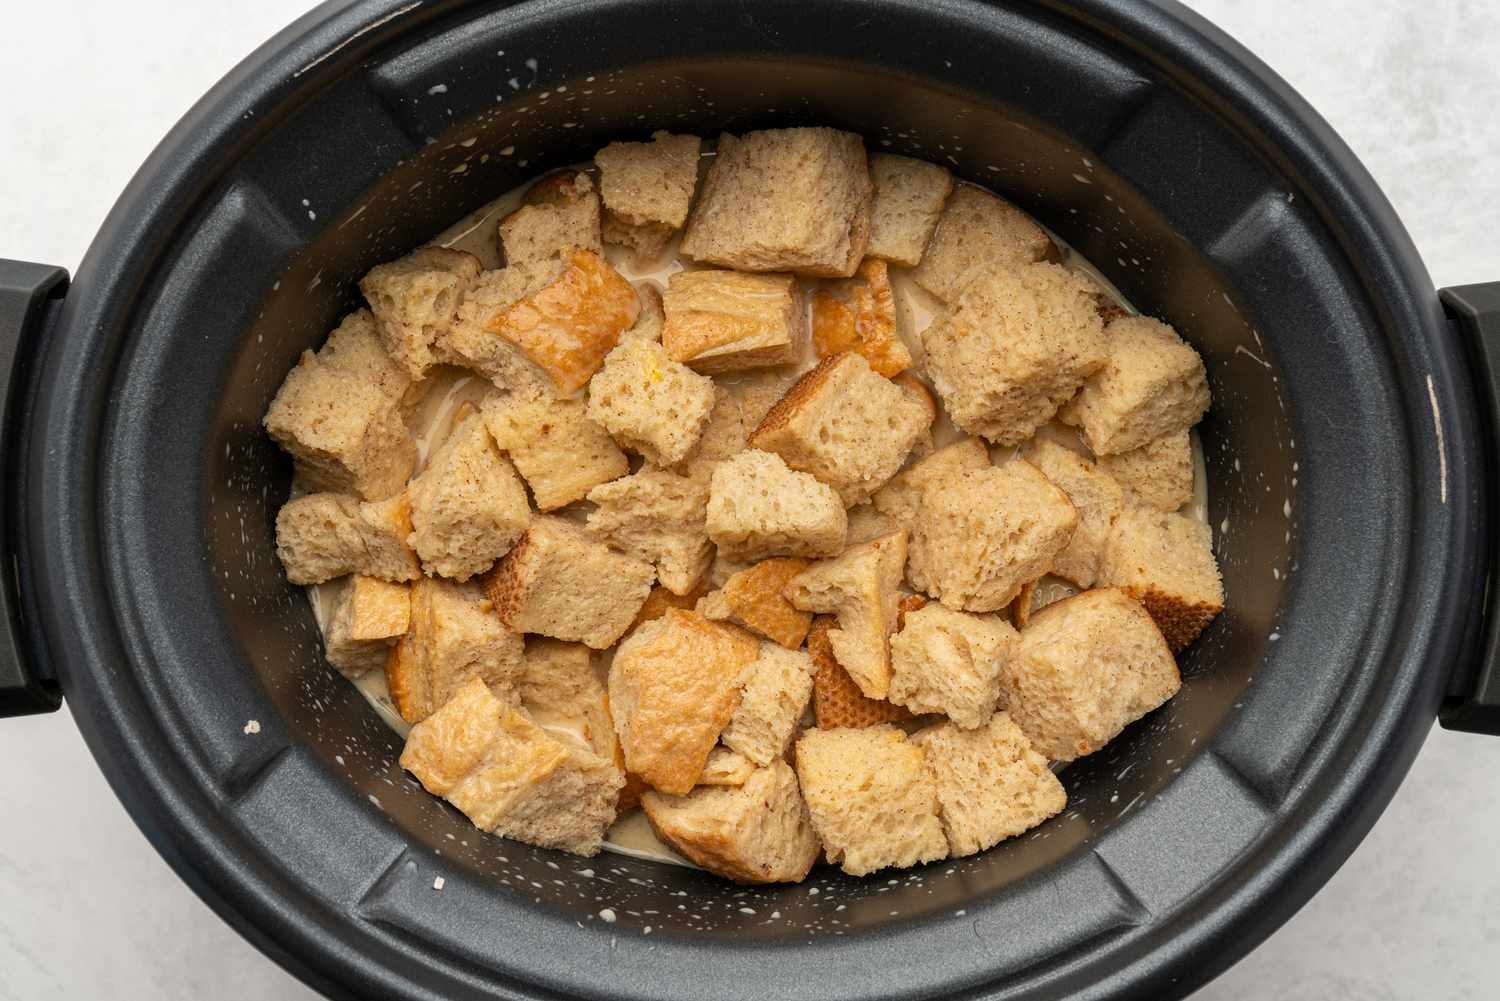 Egg and sugar mixture poured over cubed bread in slow cooker